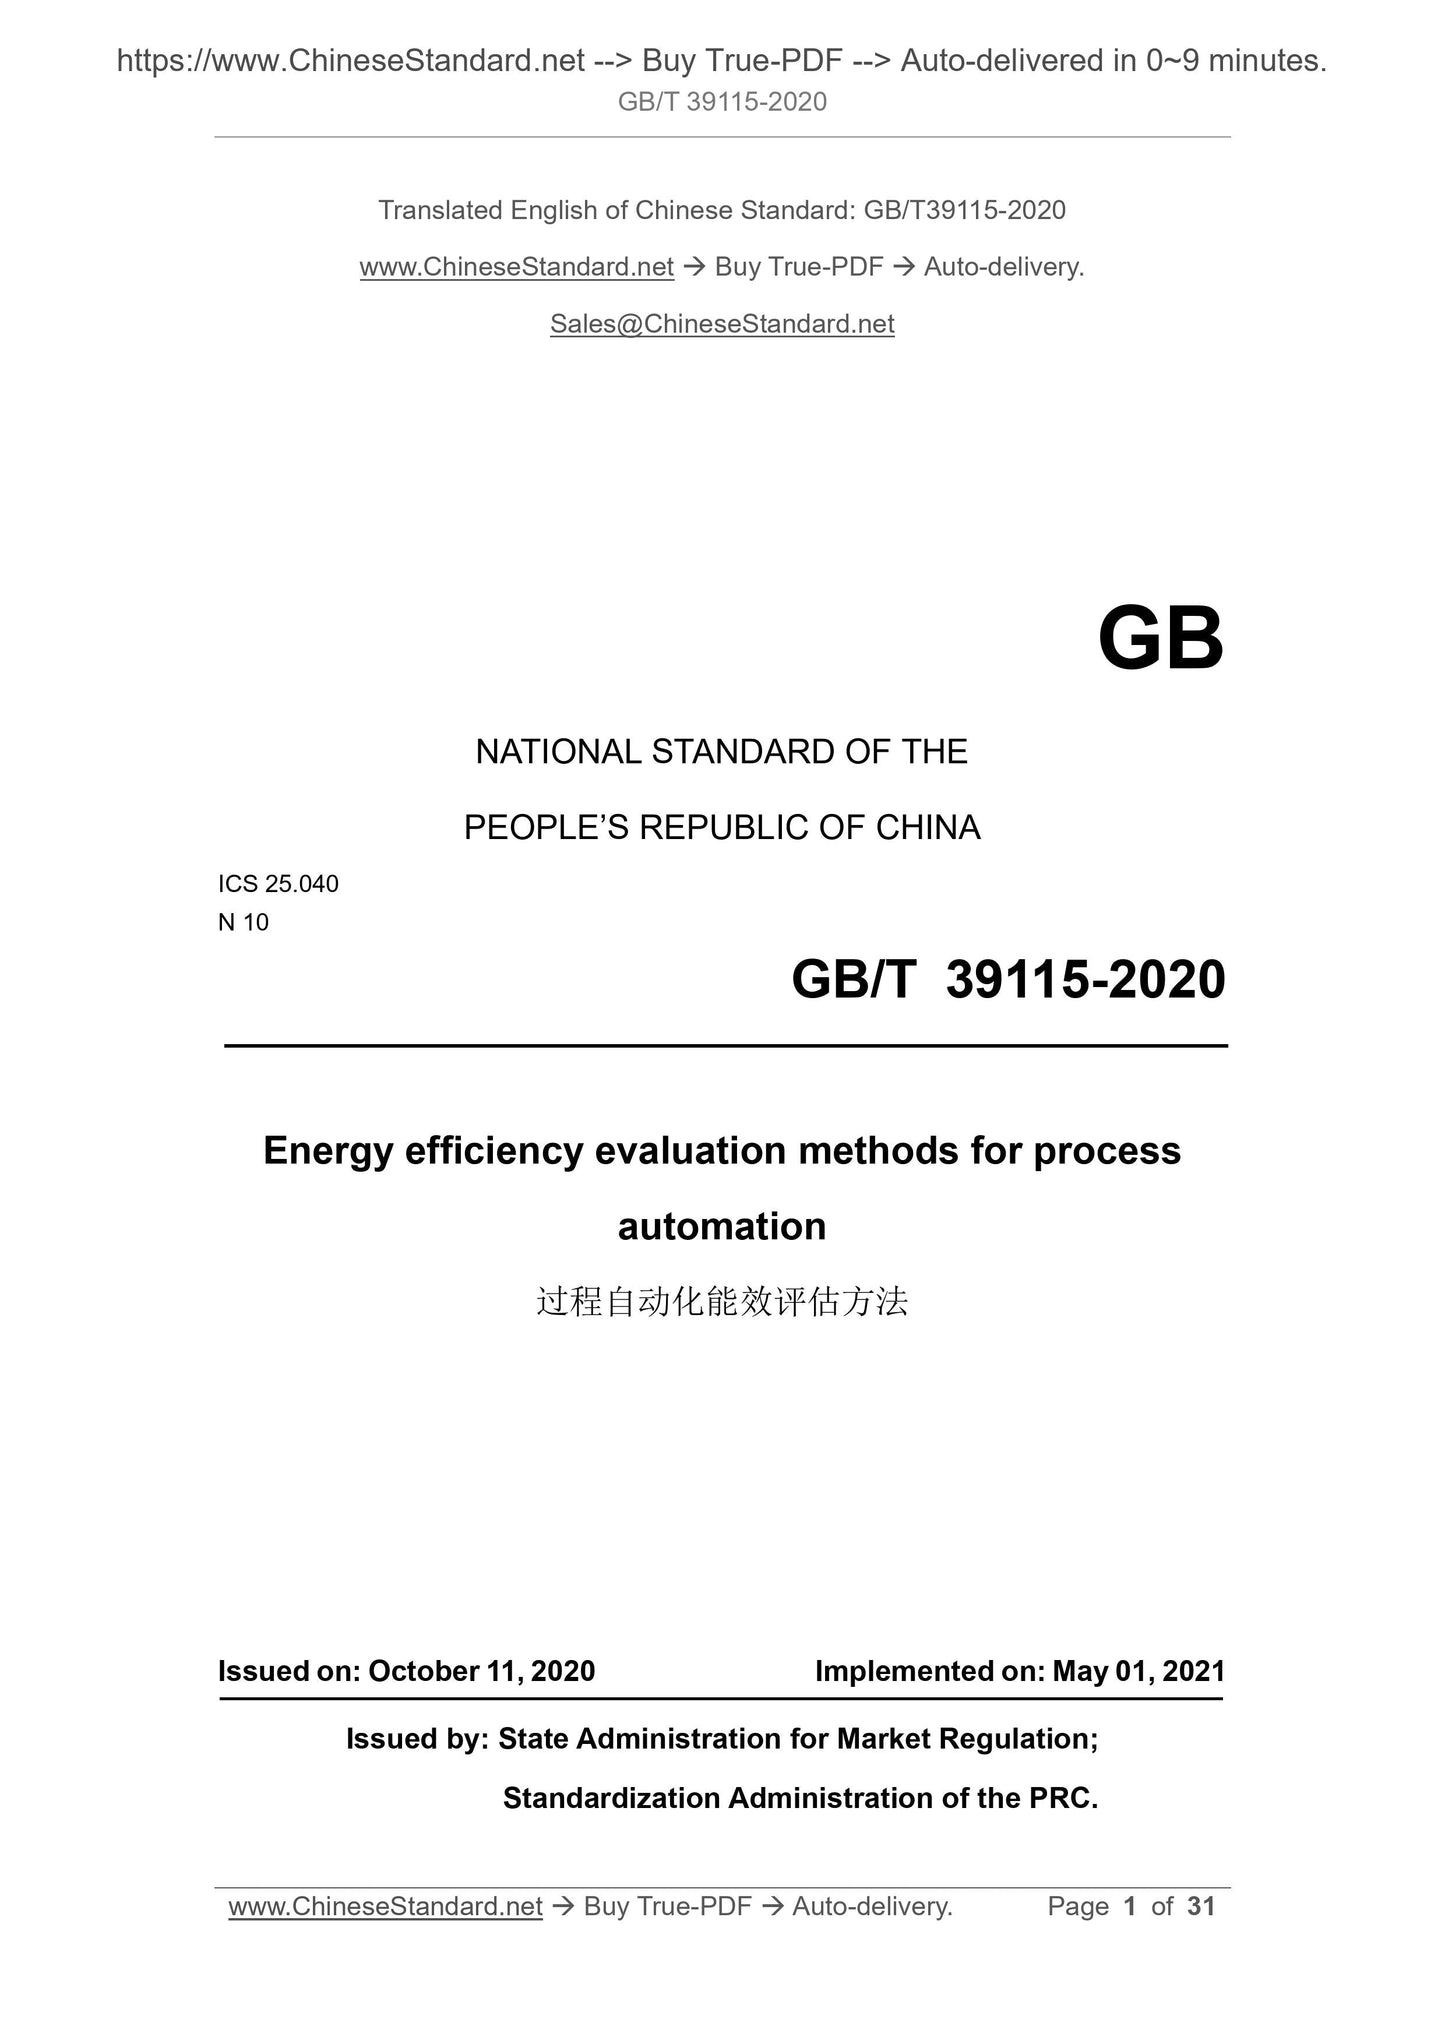 GB/T 39115-2020 Page 1